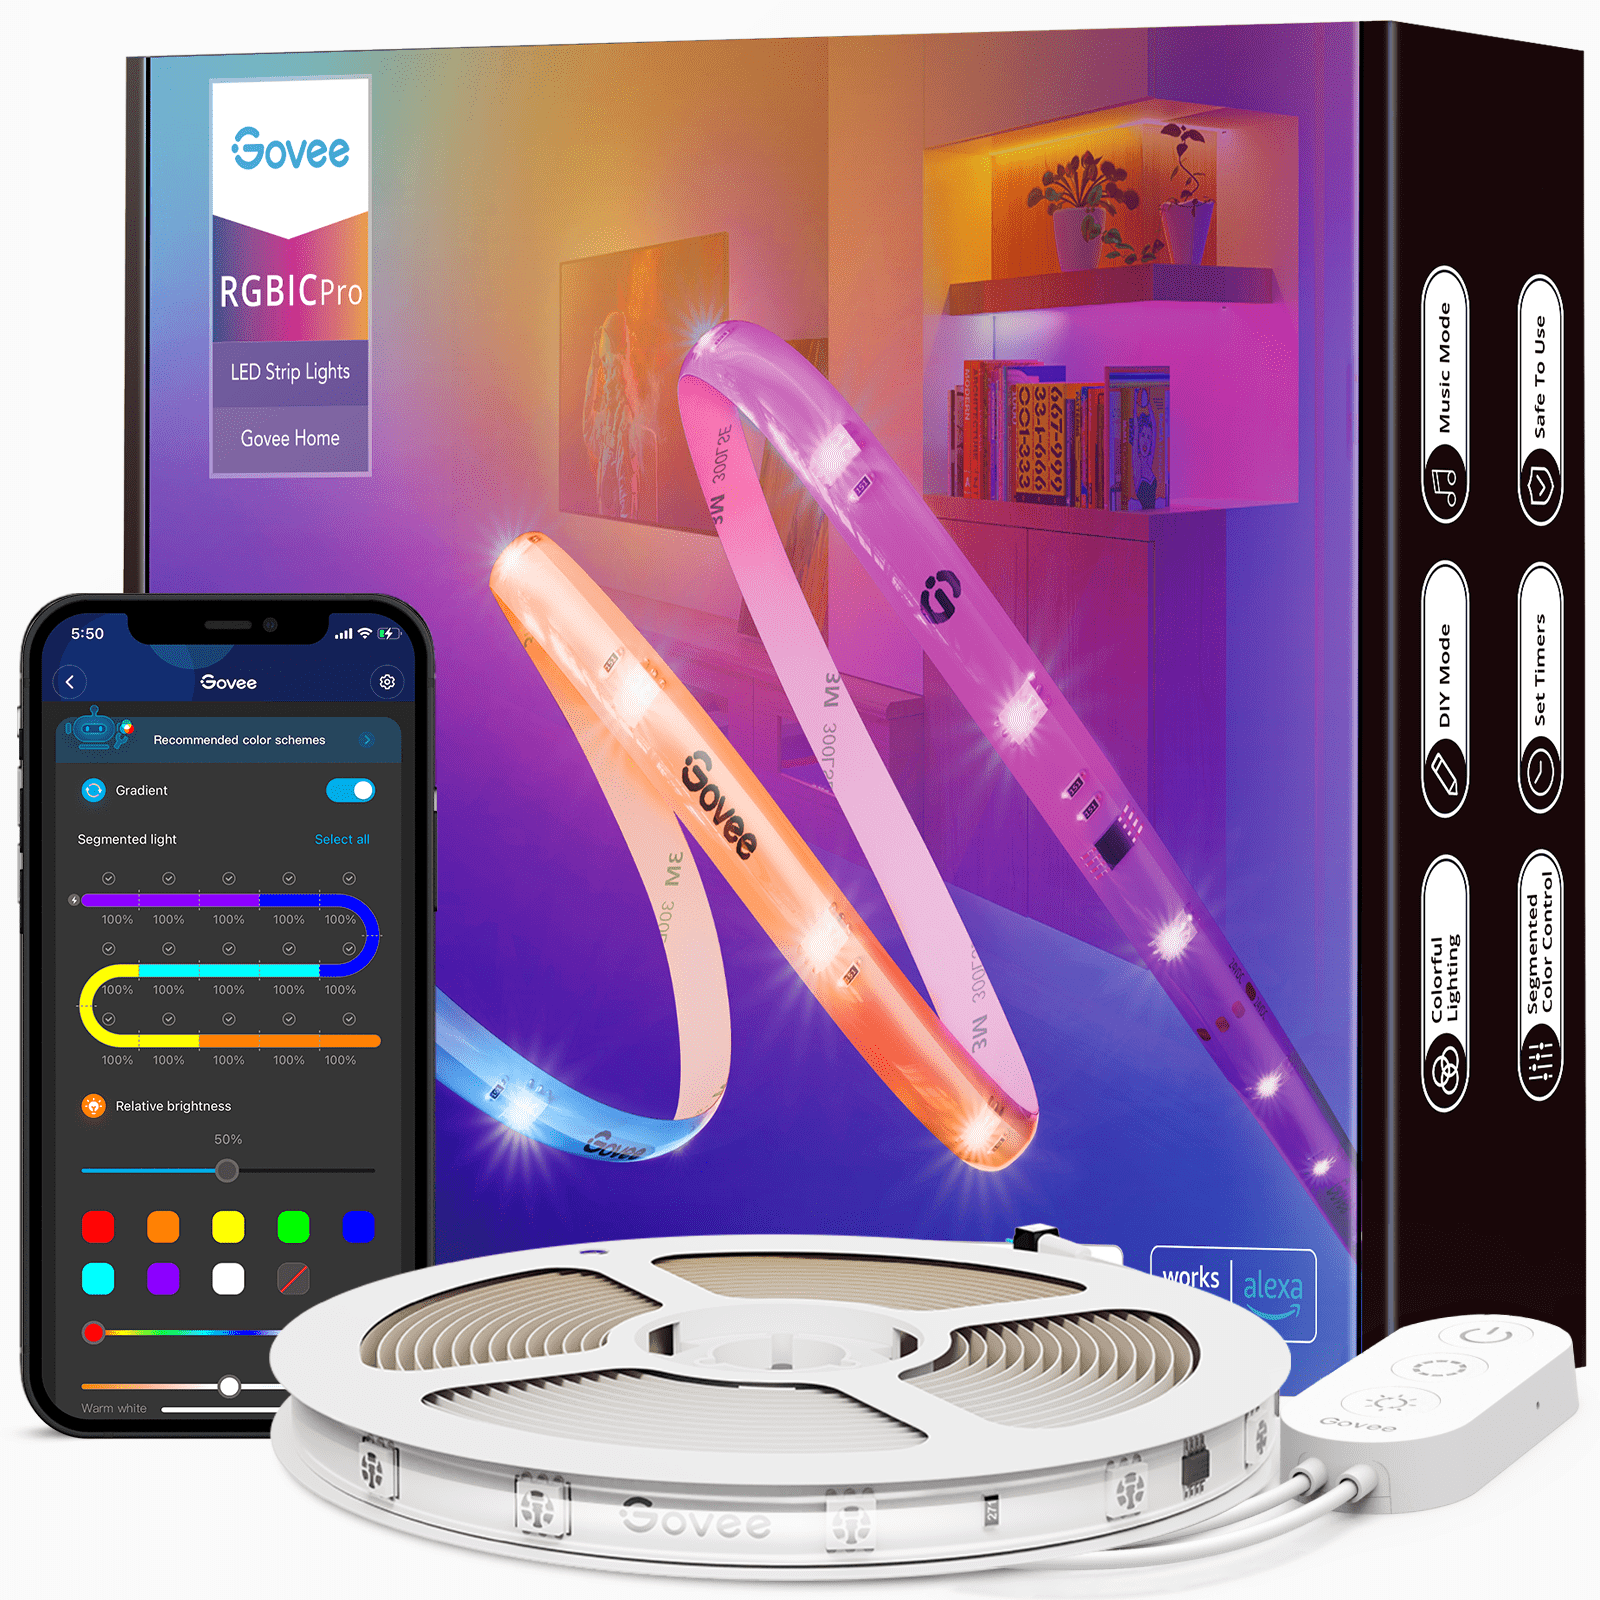 Govee Smart LED Strip Lights, 32.8ft WiFi LED Lights Work with Alexa and  Google Assistant, RGB Color Changing, 16 Million Colors with App Control  and Music Sync for Home, Kitchen, TV, Party 